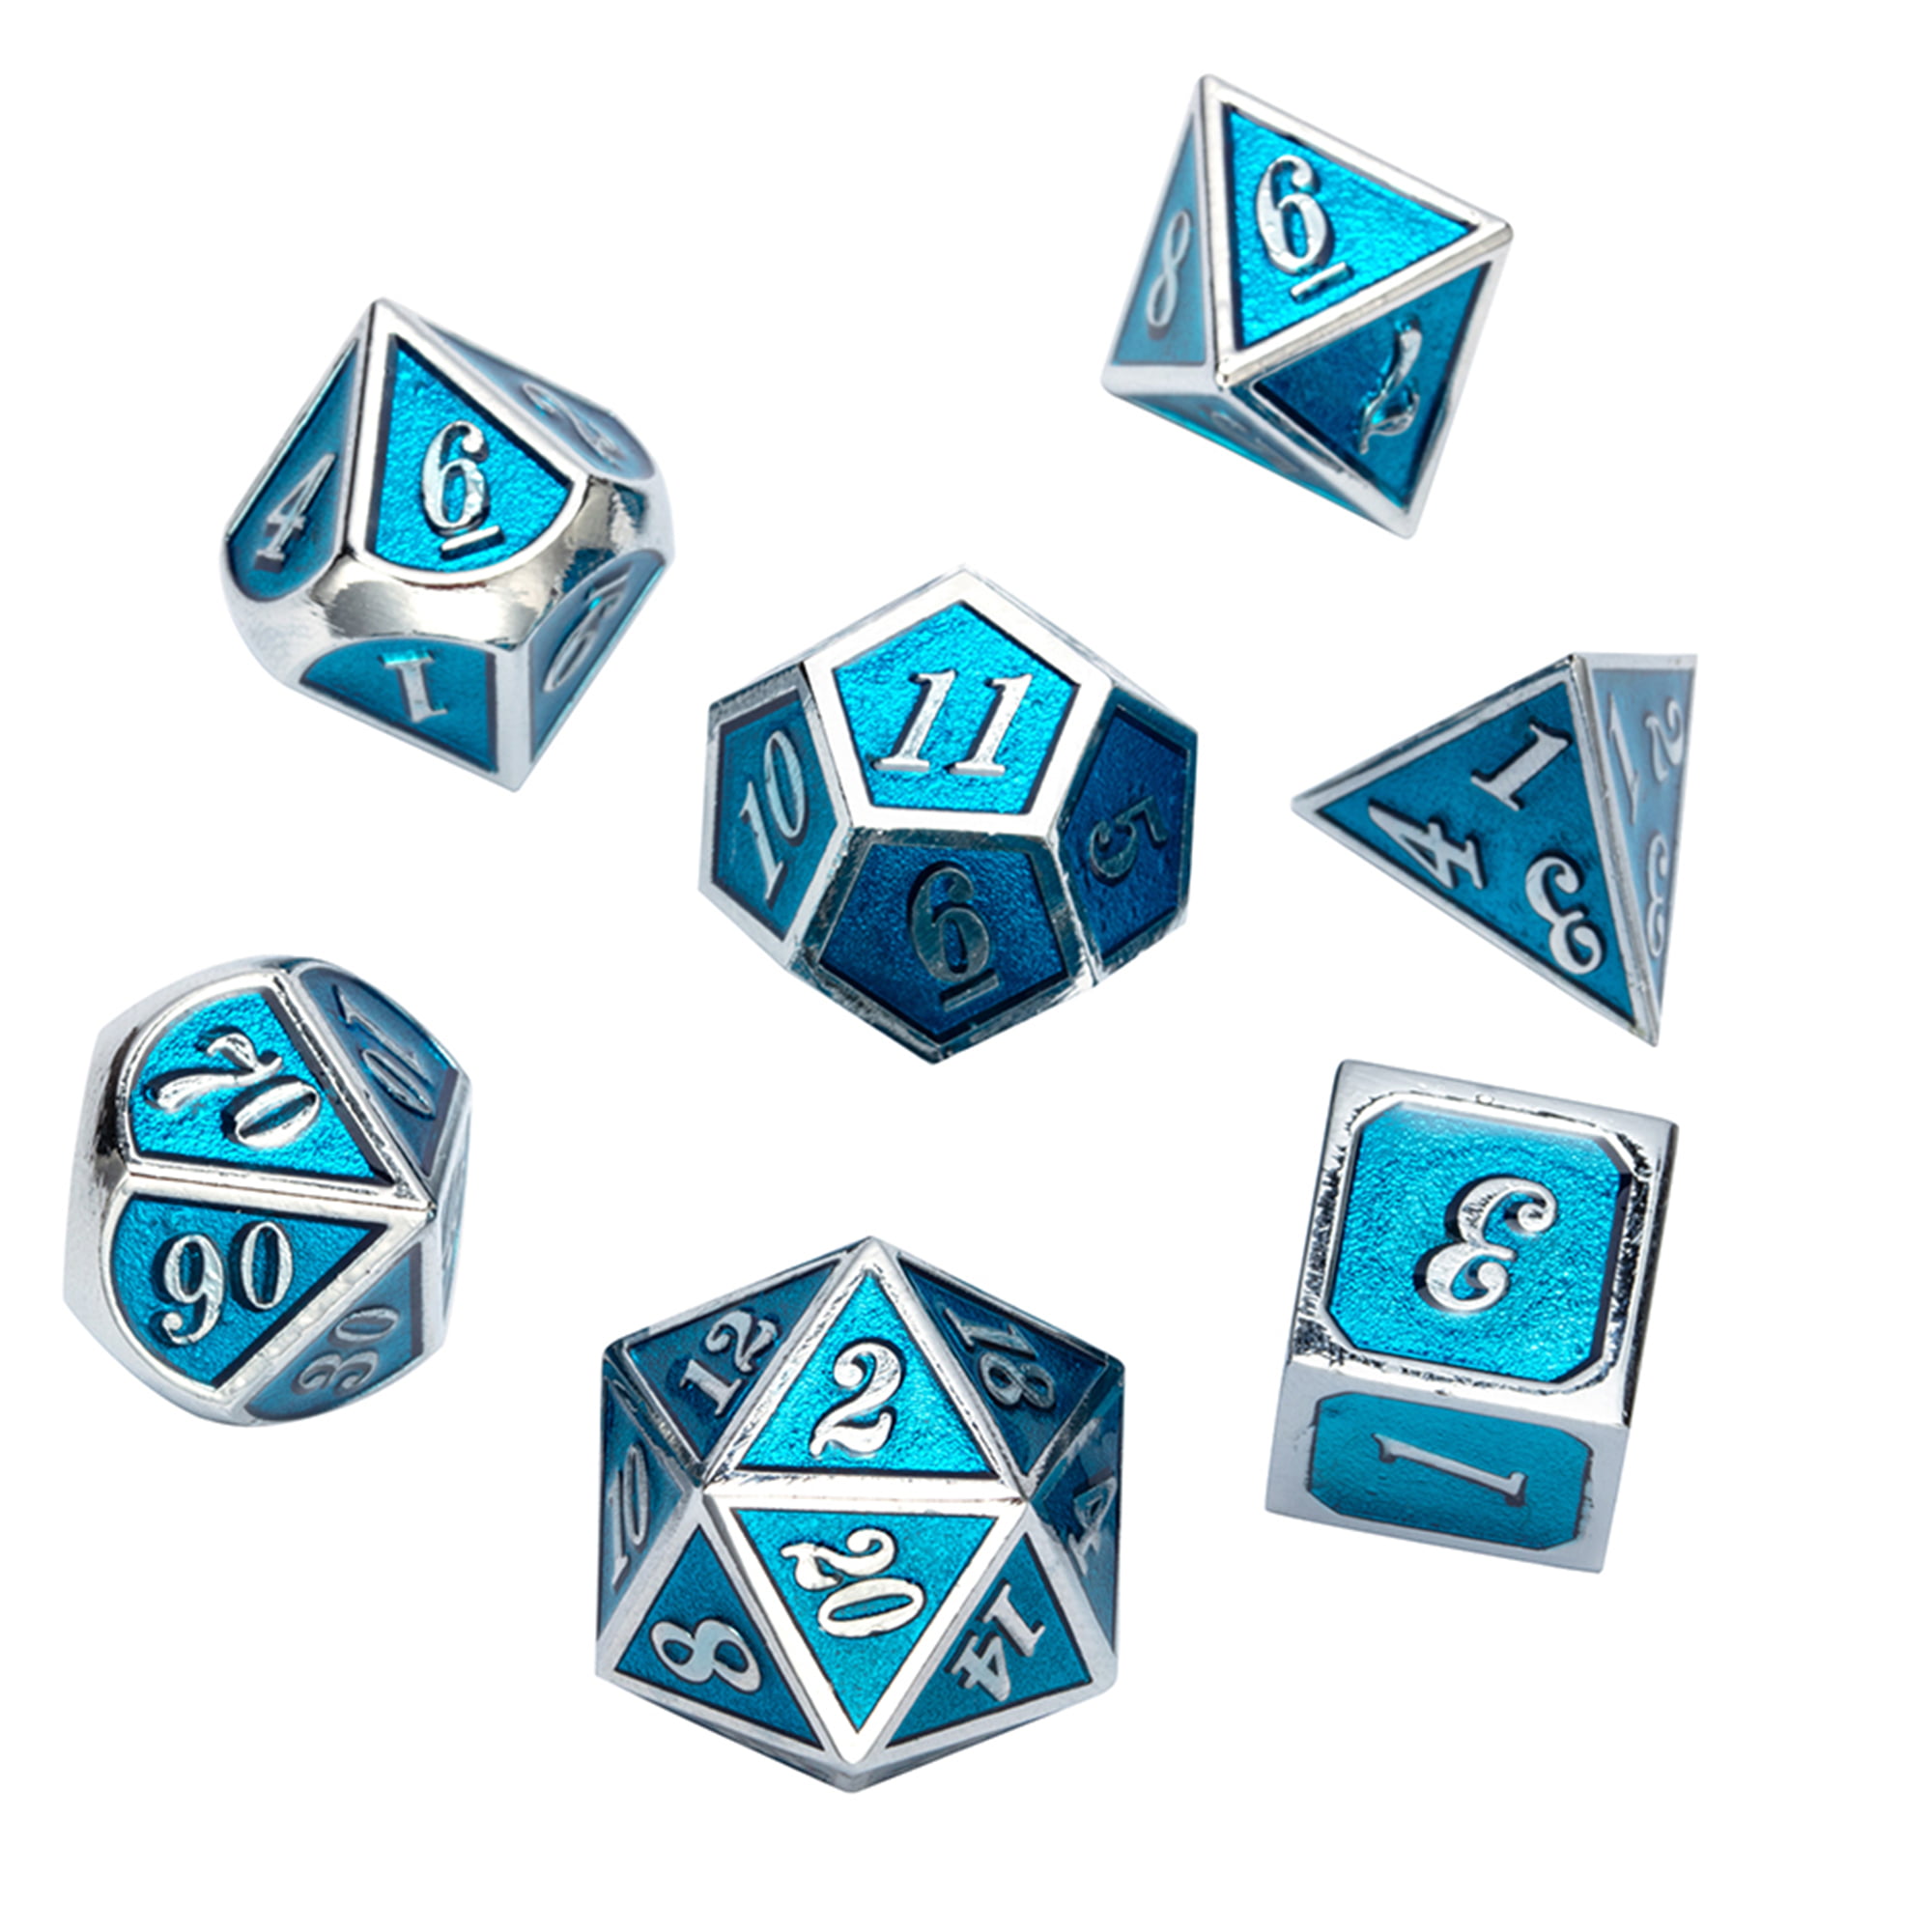 7pcs Embossed Metal Multi-sided Polyhedral Dice for DnD RPG MTG Games 